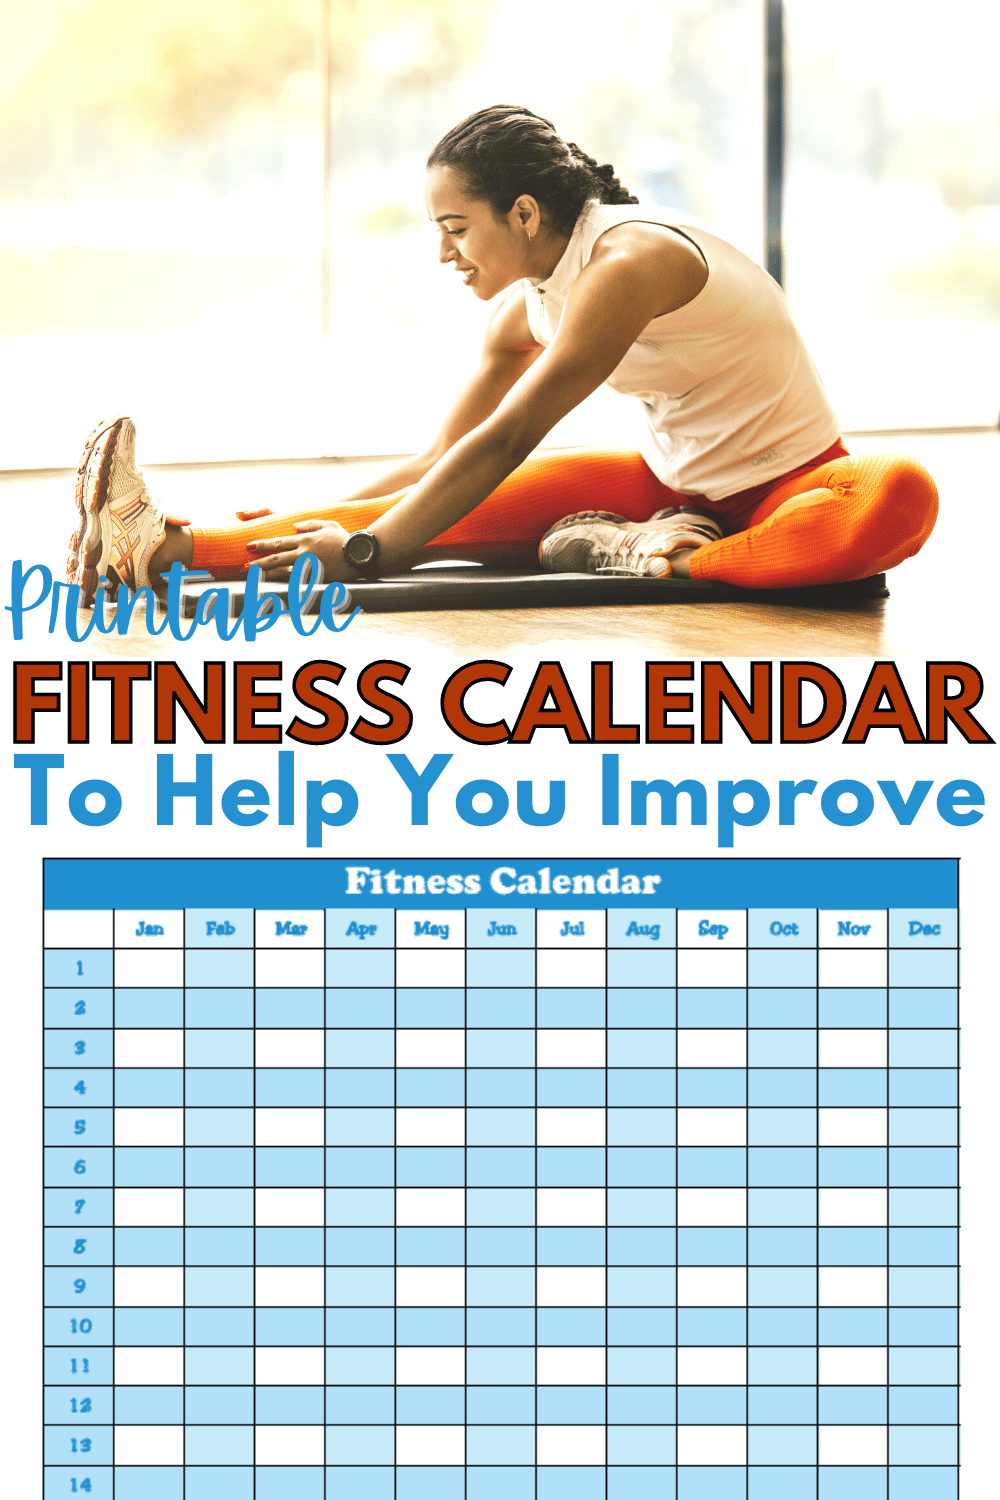 If you have resolved to improve your fitness this year, you don’t have to fall into the category of February quitters. Use this chart to stay on track. #fitness #fitnessmotivation #printable via @wondermomwannab